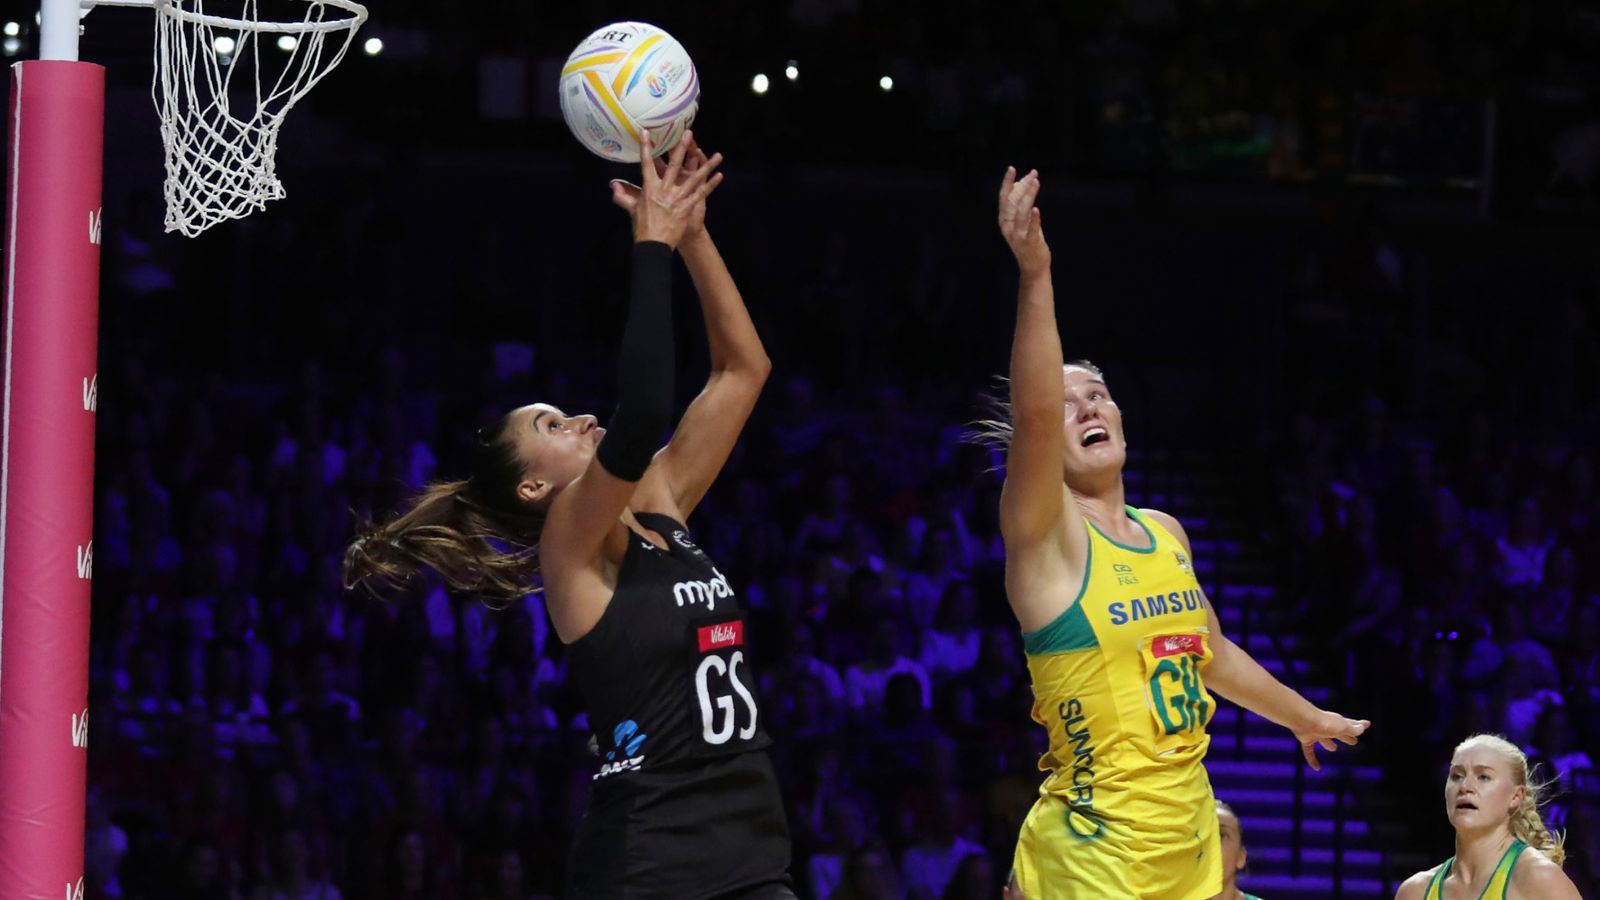 Sydney to host Netball World Cup for the third time in 2027 Netball